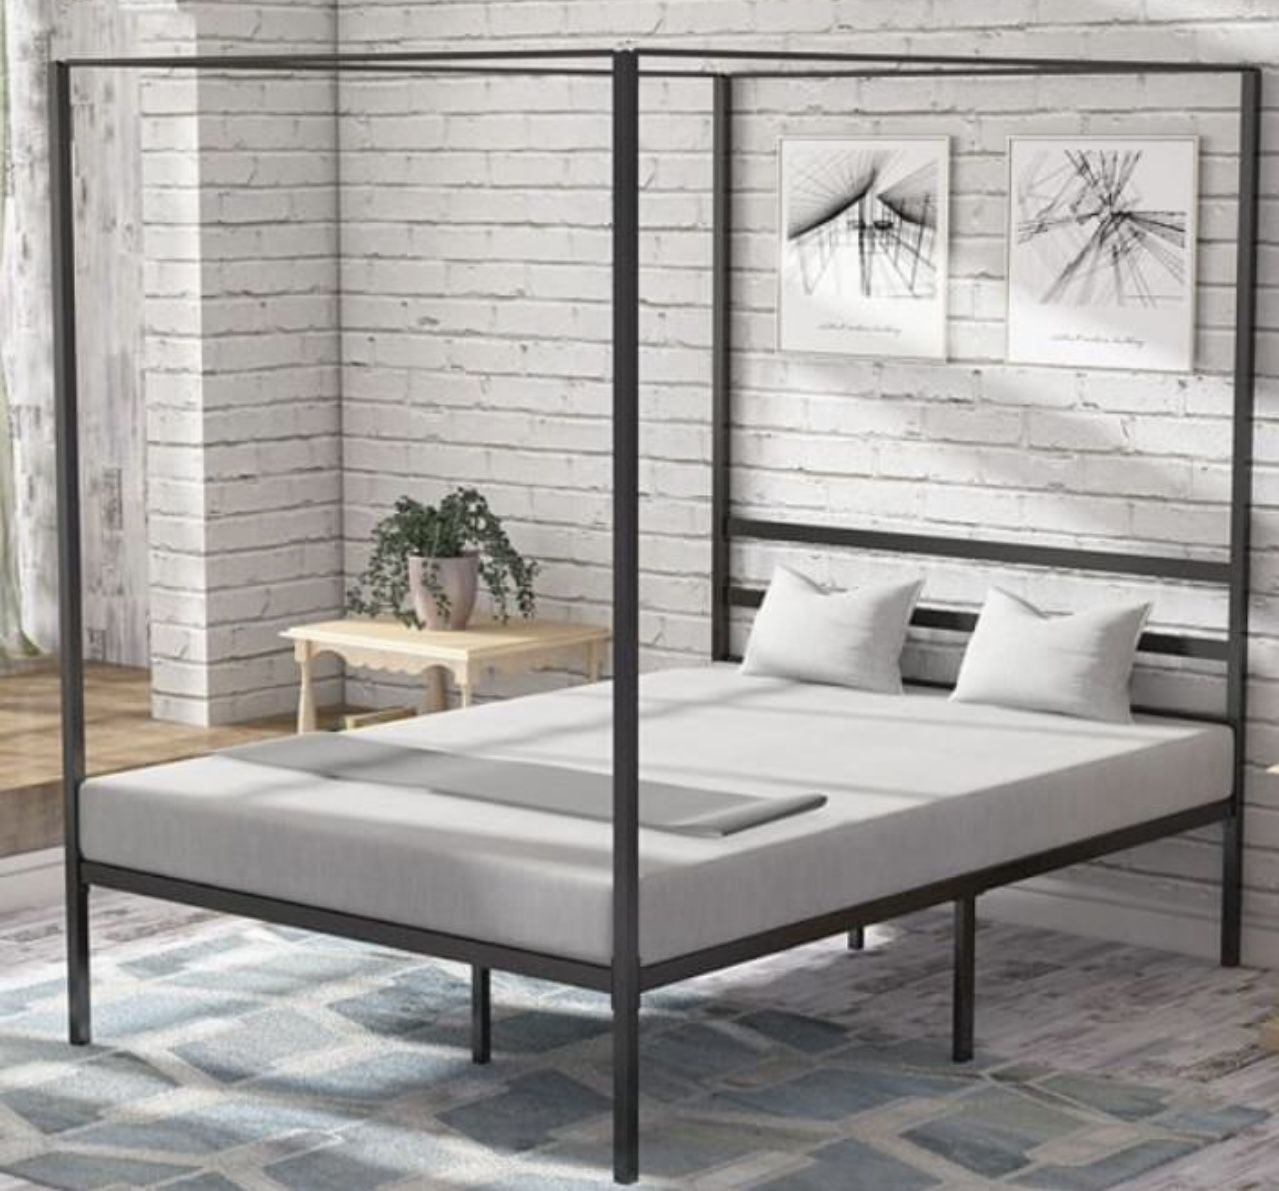 CANOPY BED FRAME QUEEN SIZE BRAND NEW IN BOX!!!